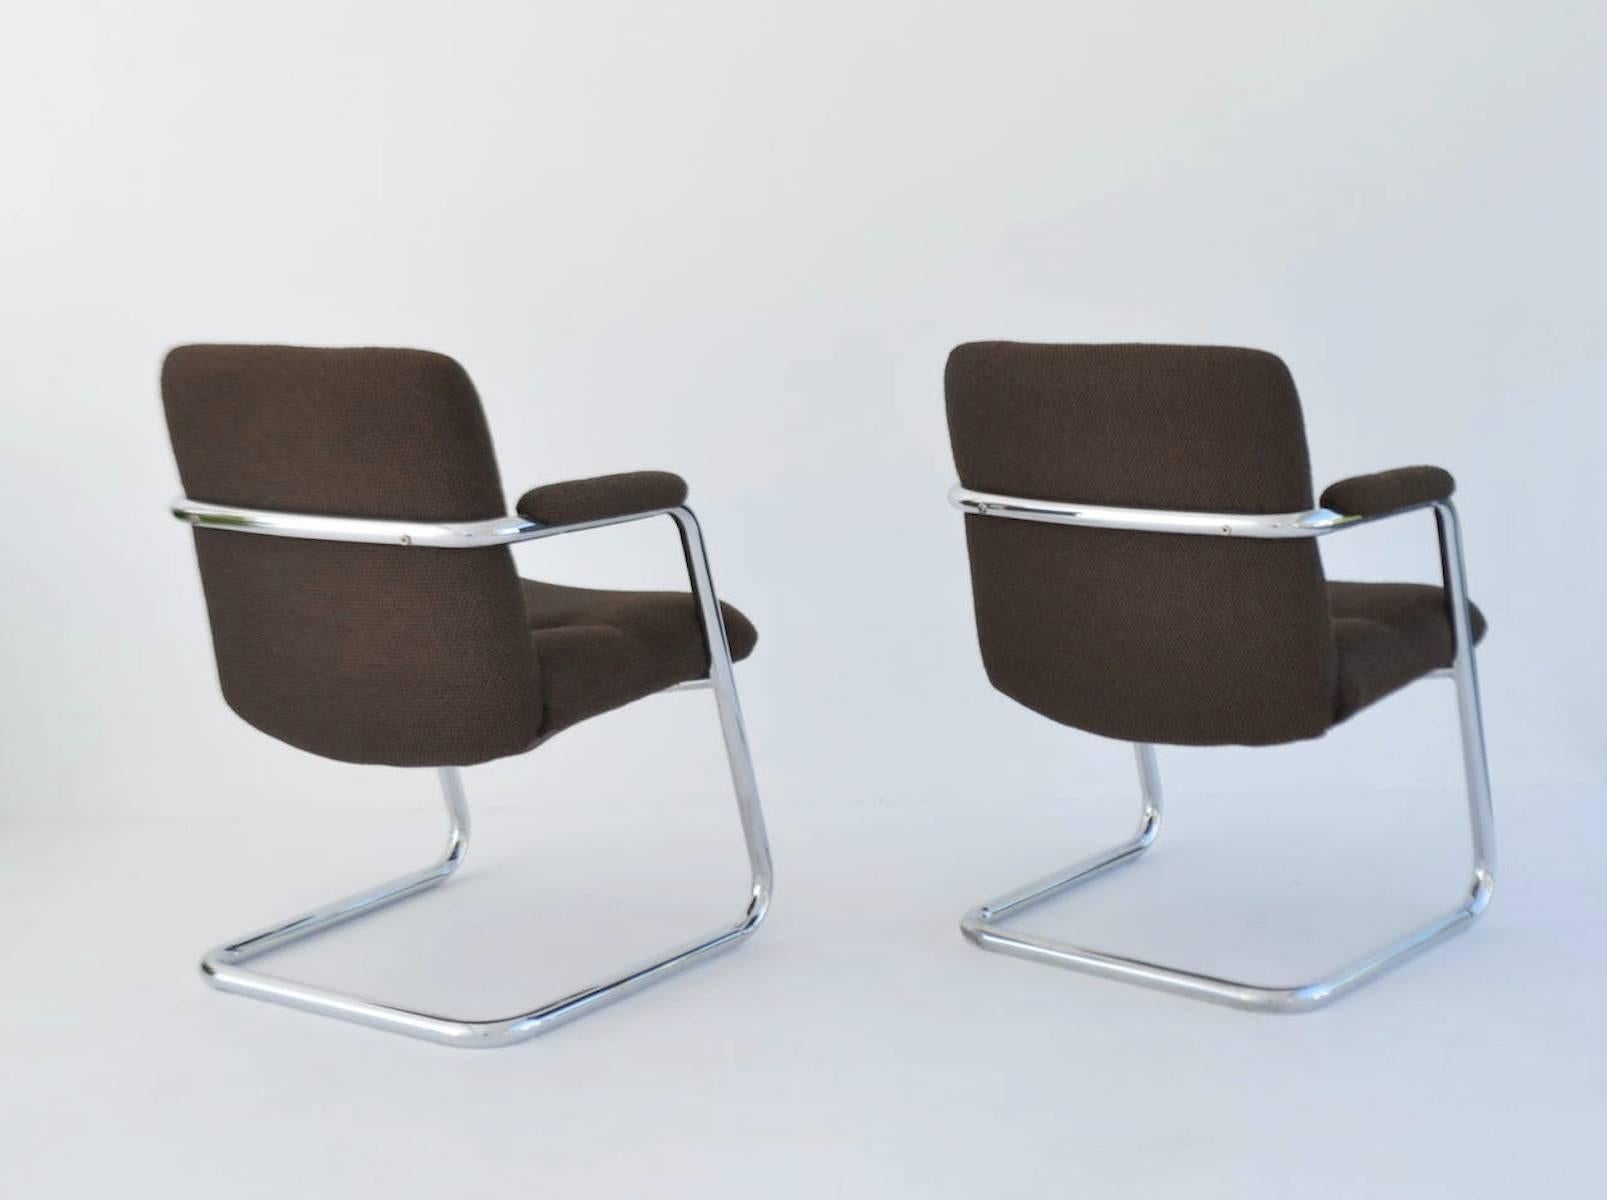 American Pair of Cantilever Midcentury Lounge Chairs For Sale